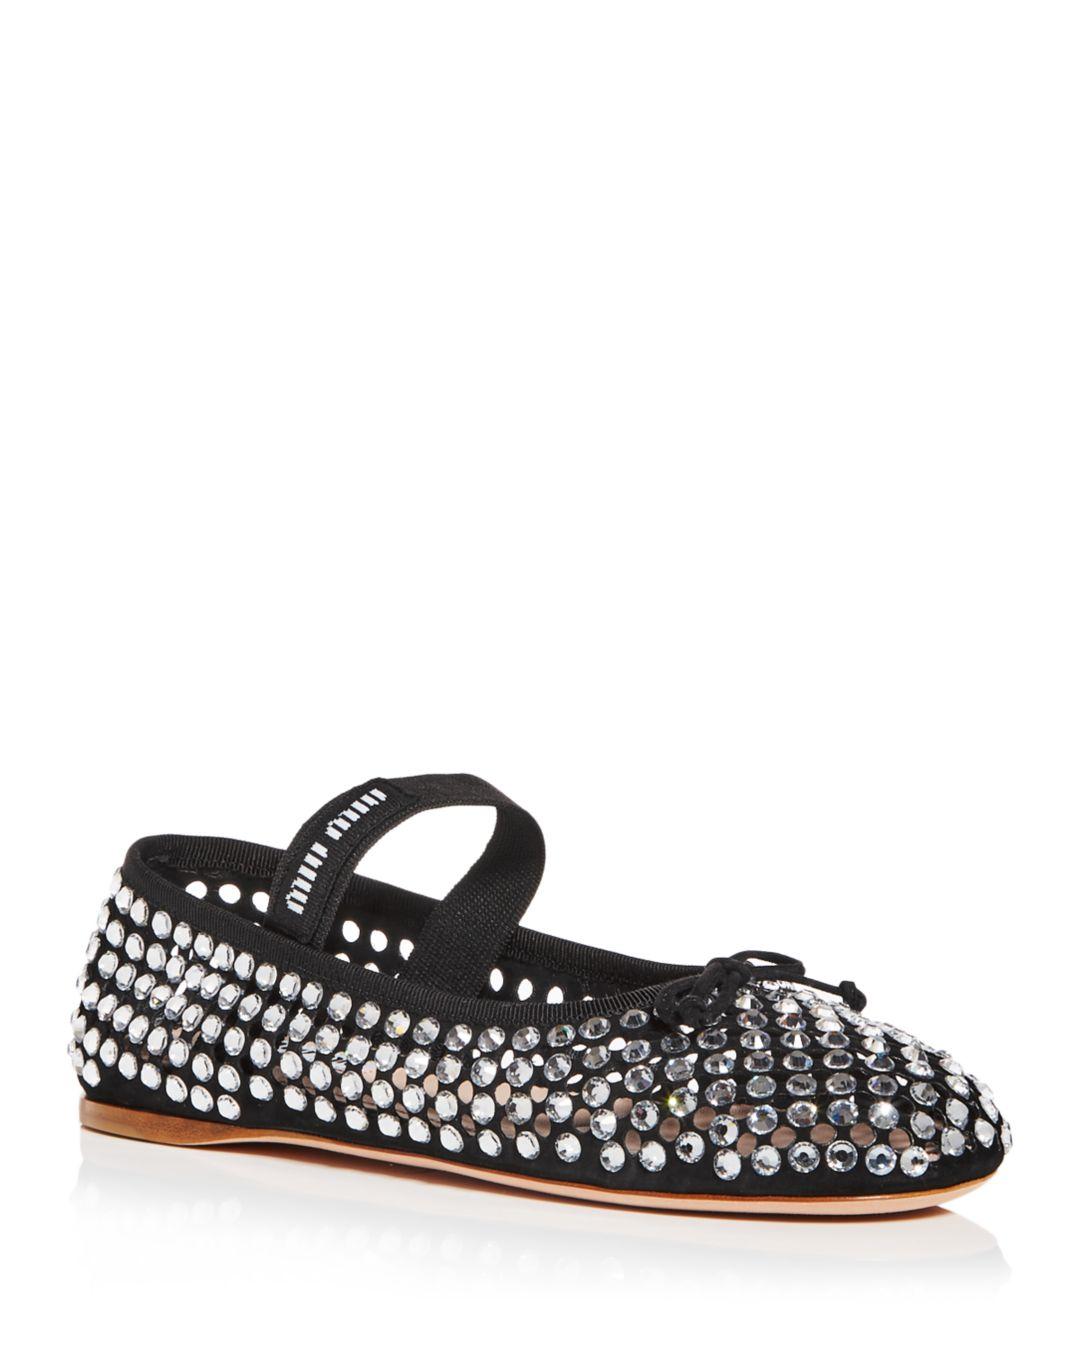 Miu Miu Crystal Embellished Perforated Ballet Flats in White | Lyst